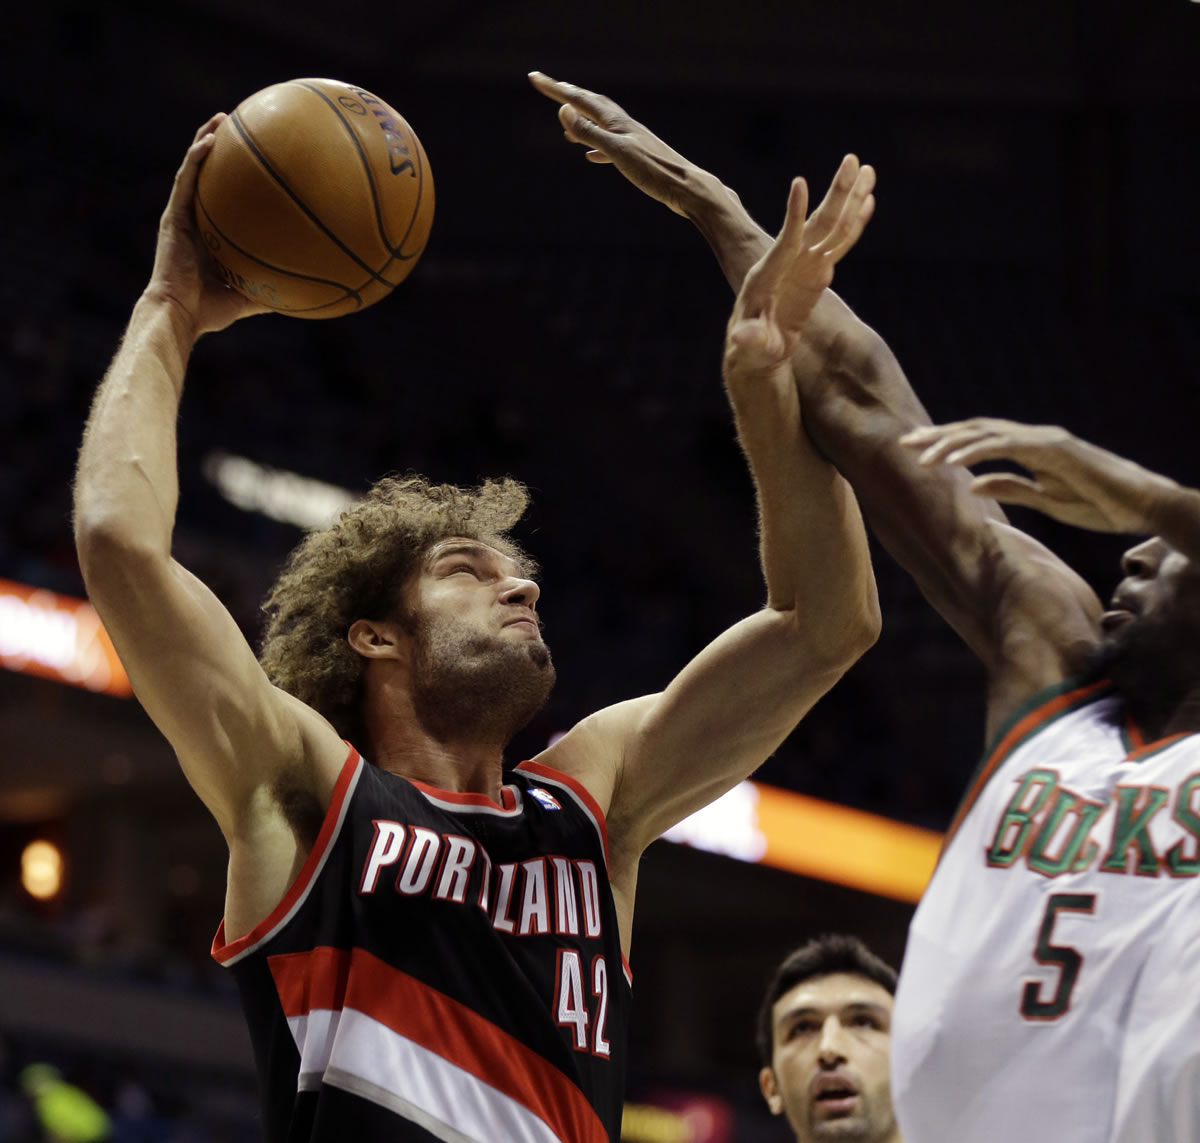 Portland Trail blazers' Robin Lopez (42) goes up for a shot against the Milwaukee Bucks' Ekpe Udoh, right, during the first half of an NBA basketball game on Wednesday, Nov. 20, 2013, in Milwaukee.